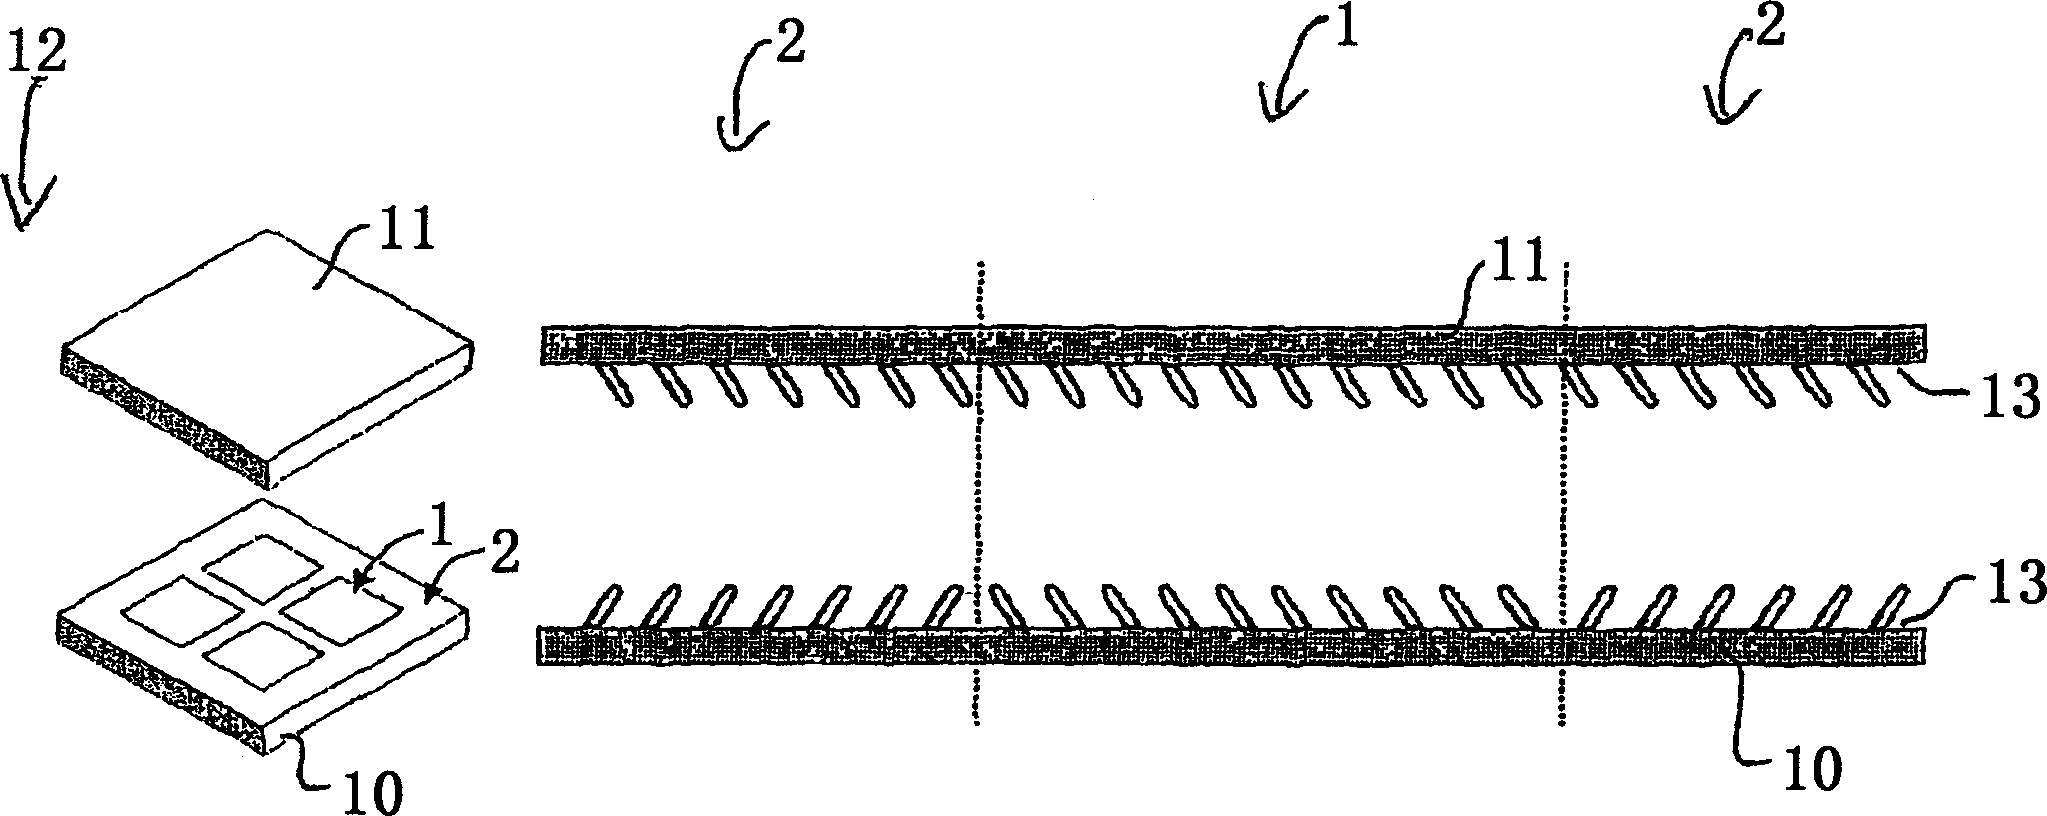 Nematicliquid crystal electrooptical element and device